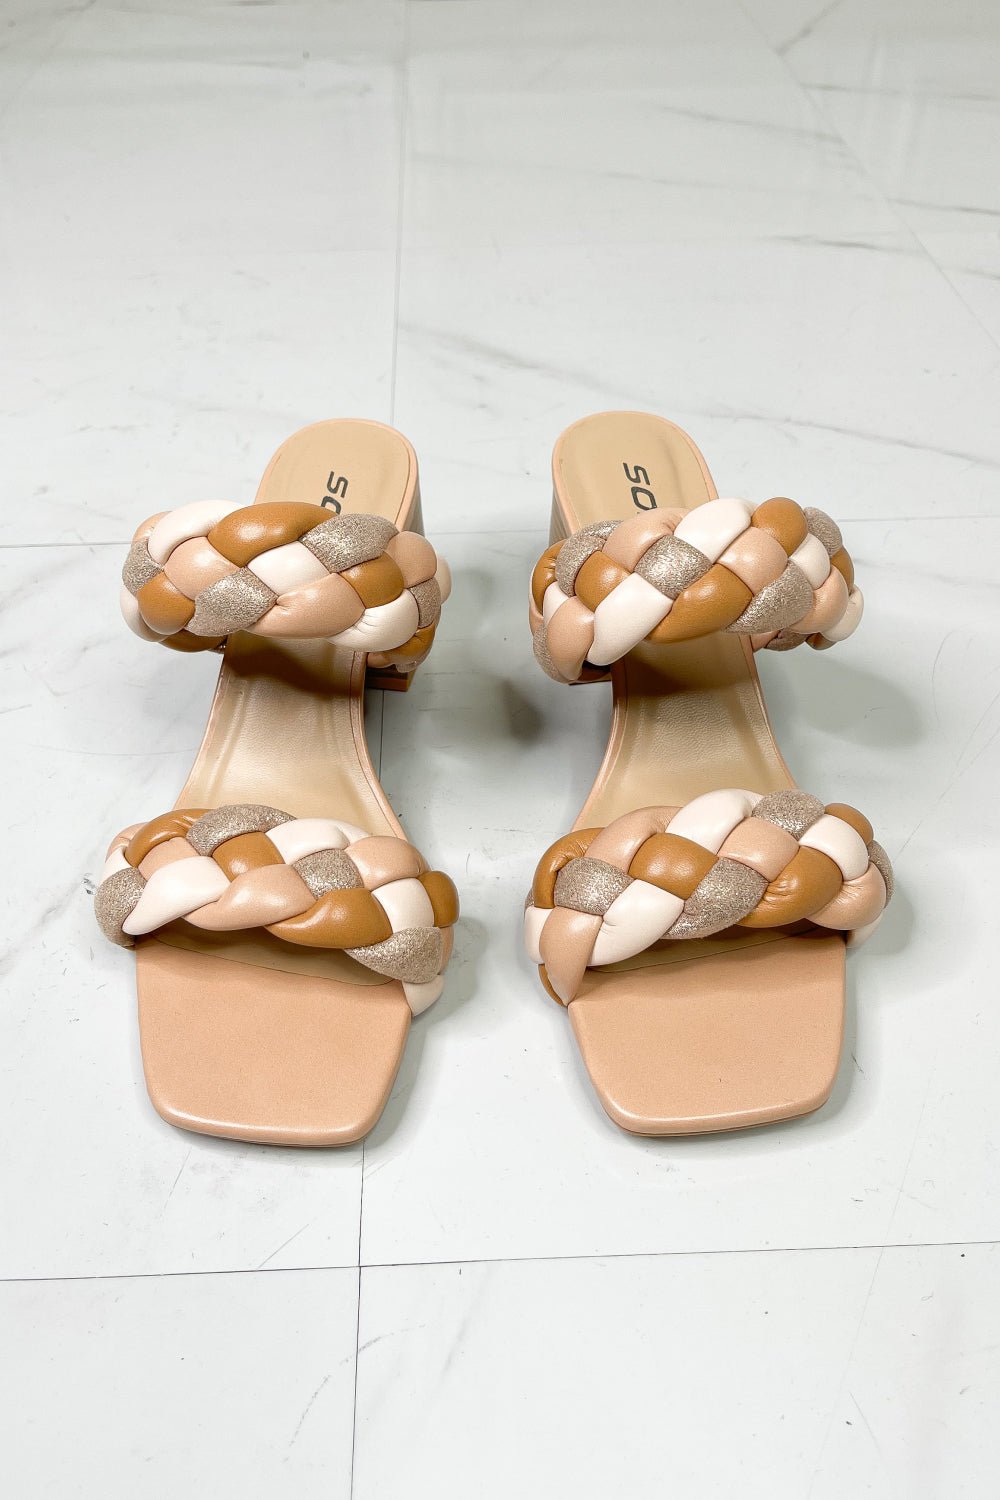 Enchanting Interwoven Dreams - Step into Elegance and Embrace Comfort with Braided Strap Block Heel Slide Sandals. - Guy Christopher